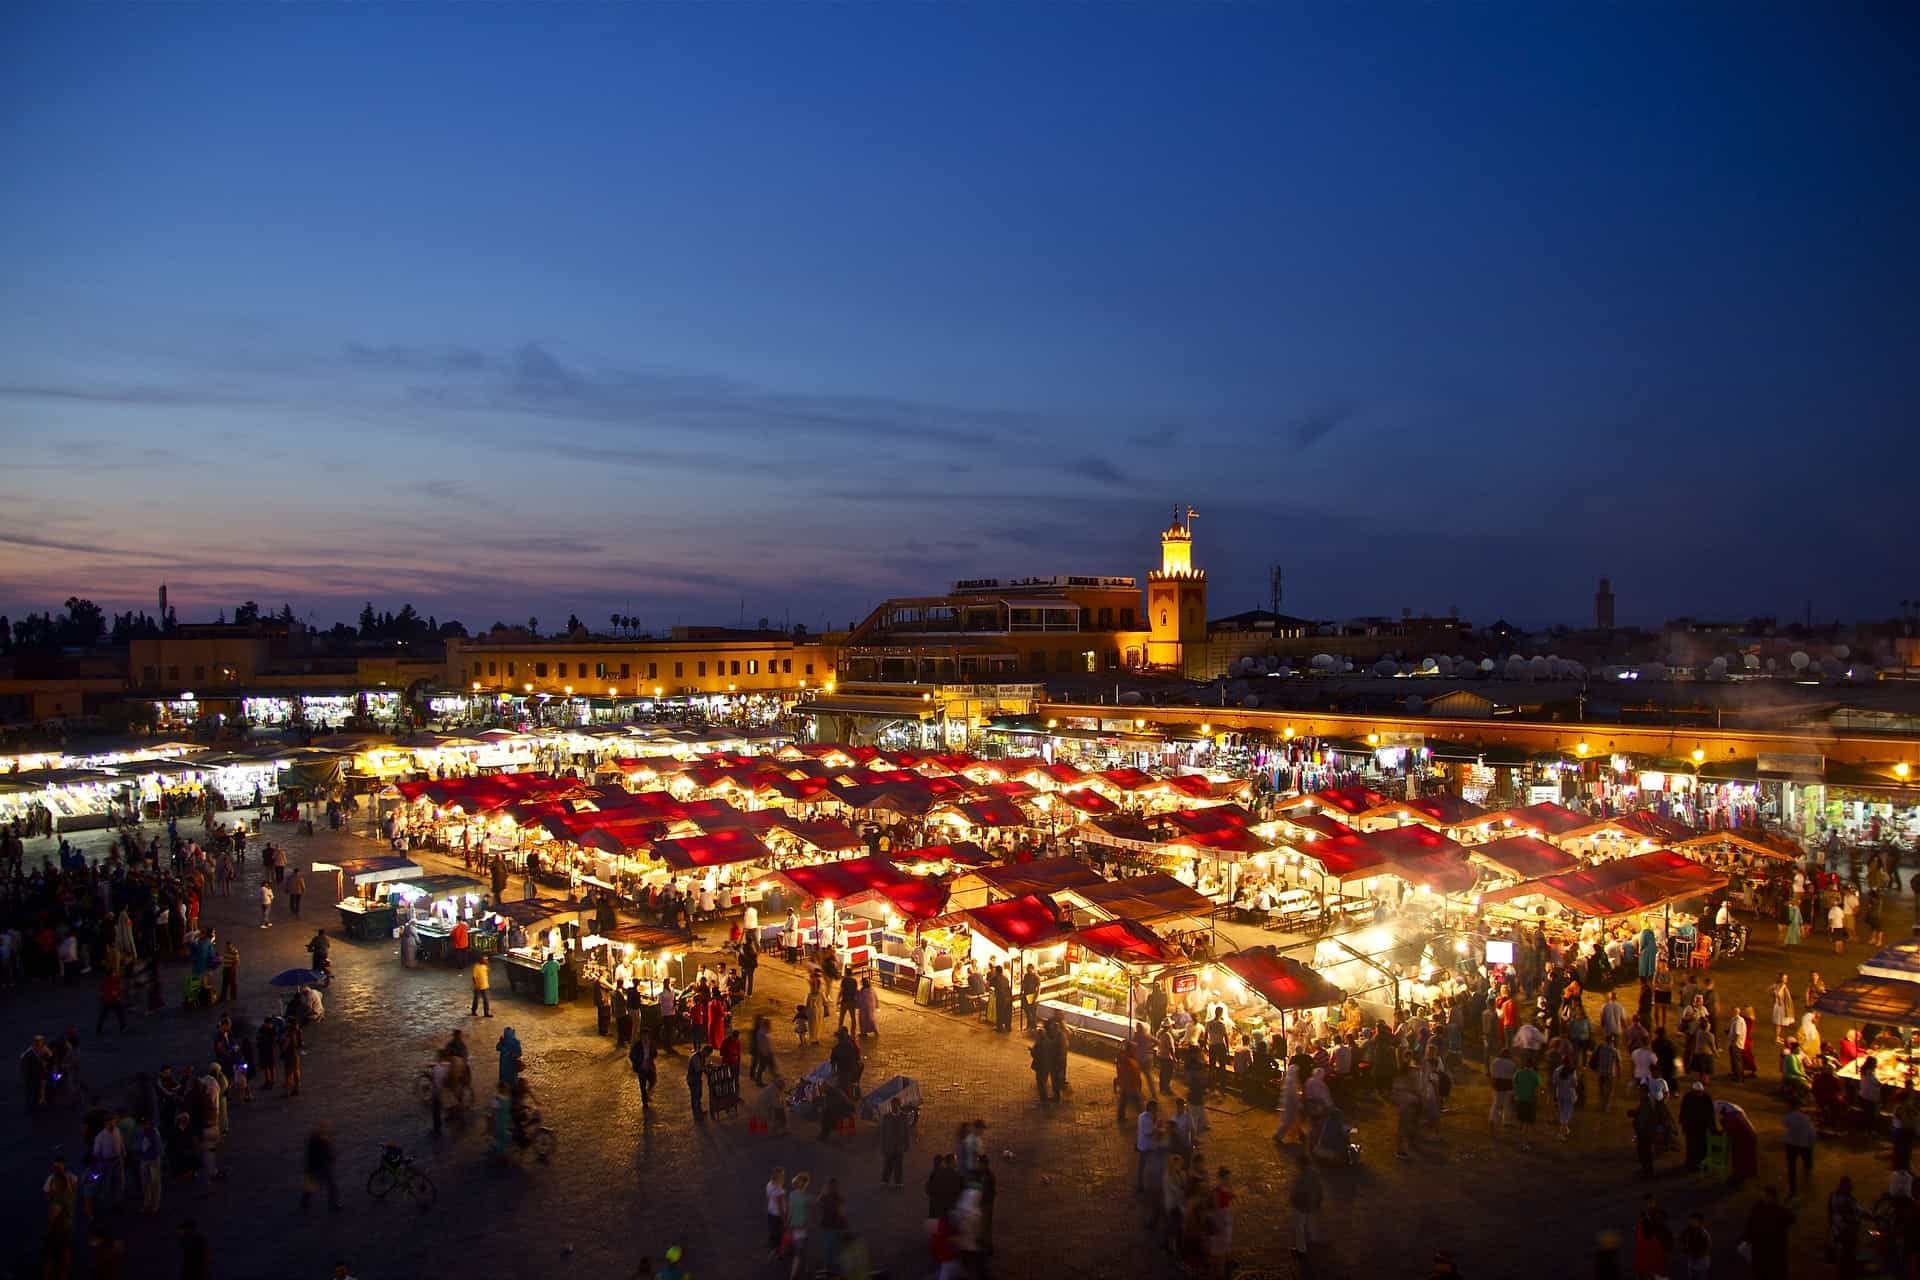 Marrakech Djemma el Fna tour - experience the square at night and eat in one of the food stalls